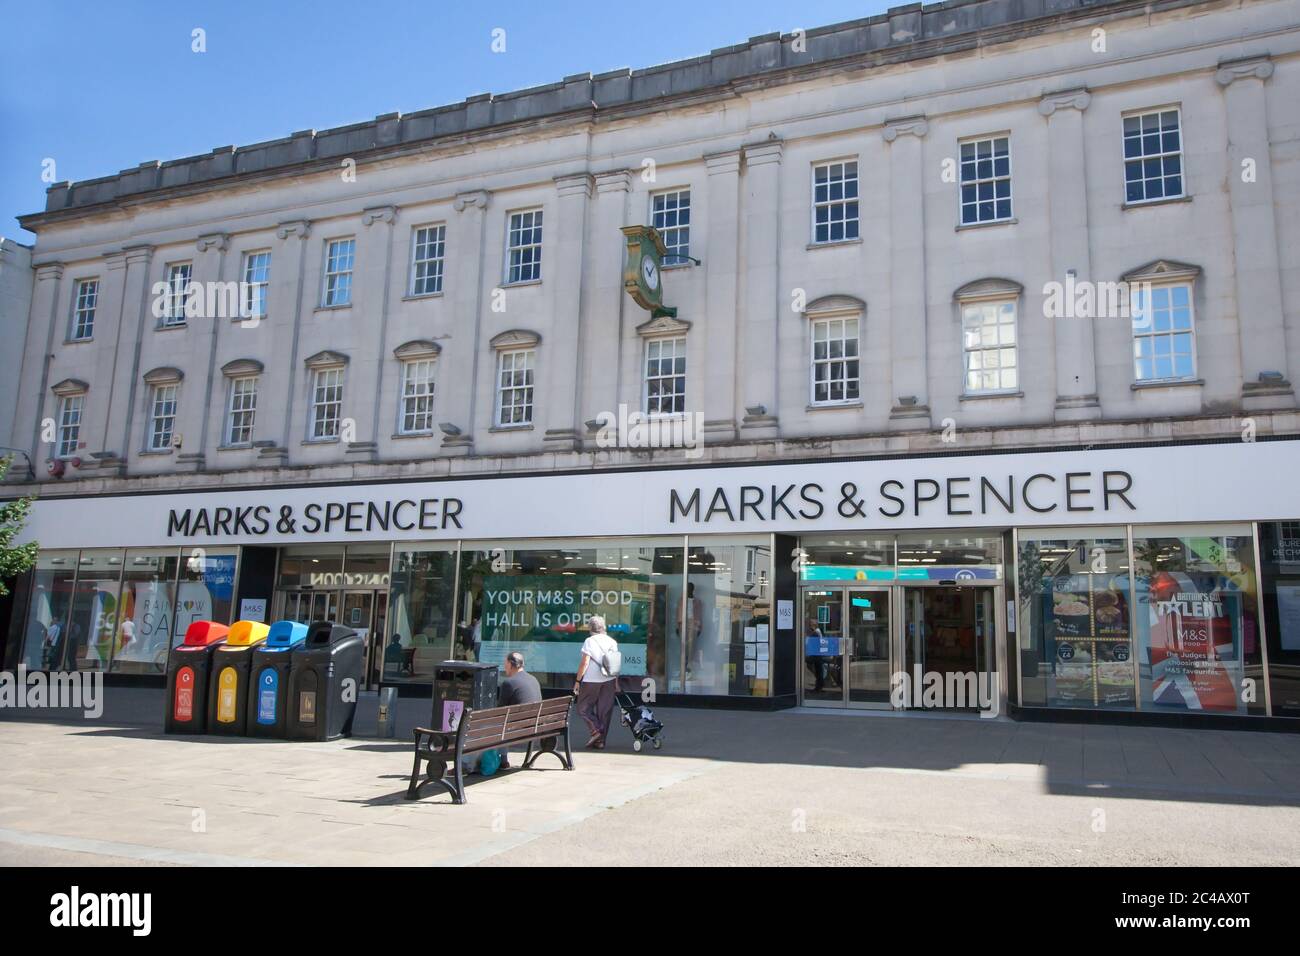 The Marks and Spencers Department Store in Cheltenham, Gloucestershire in the UK Stock Photo